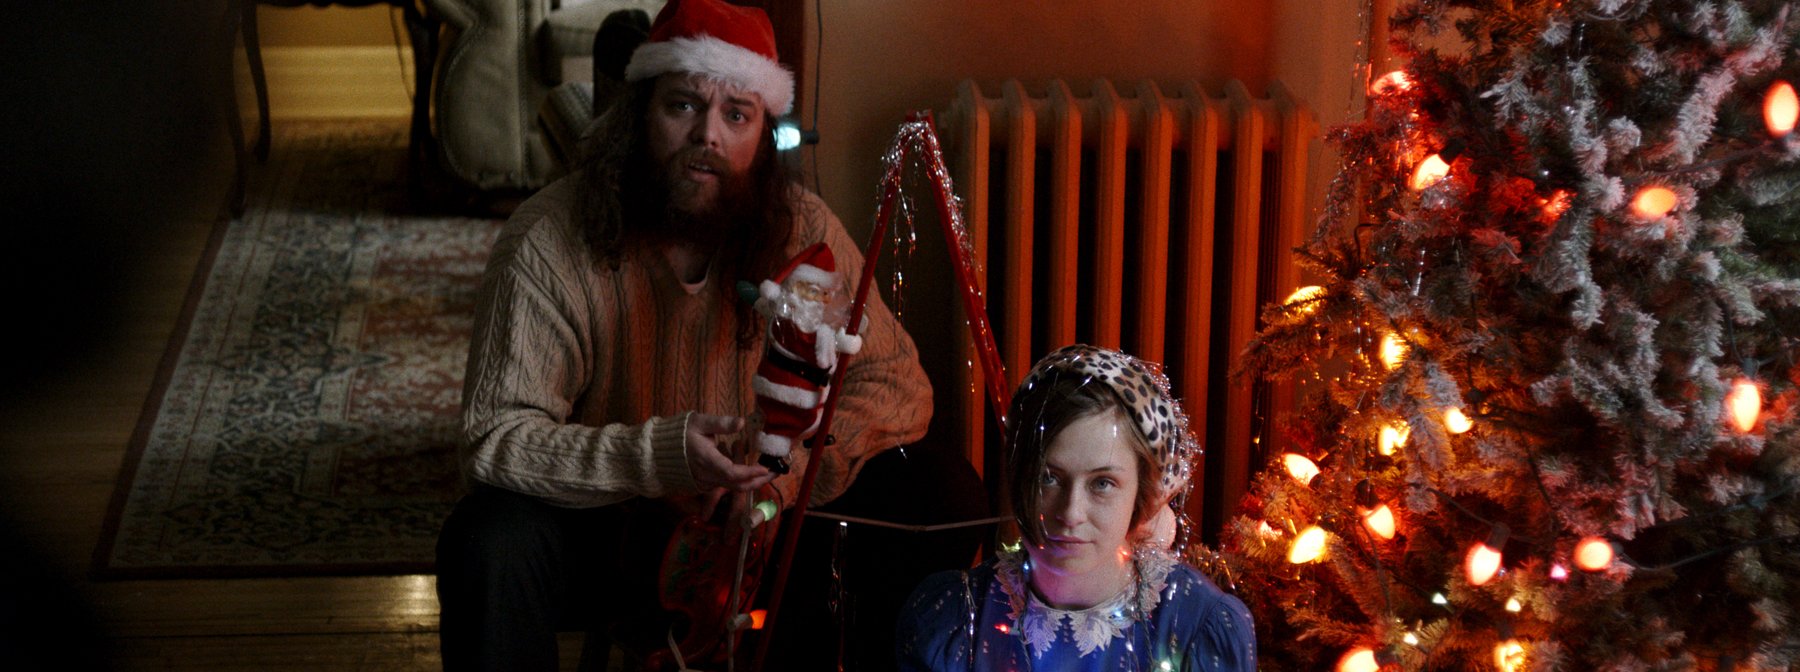 Yuletide Frights – A compendium of Crazy Christmas Horror